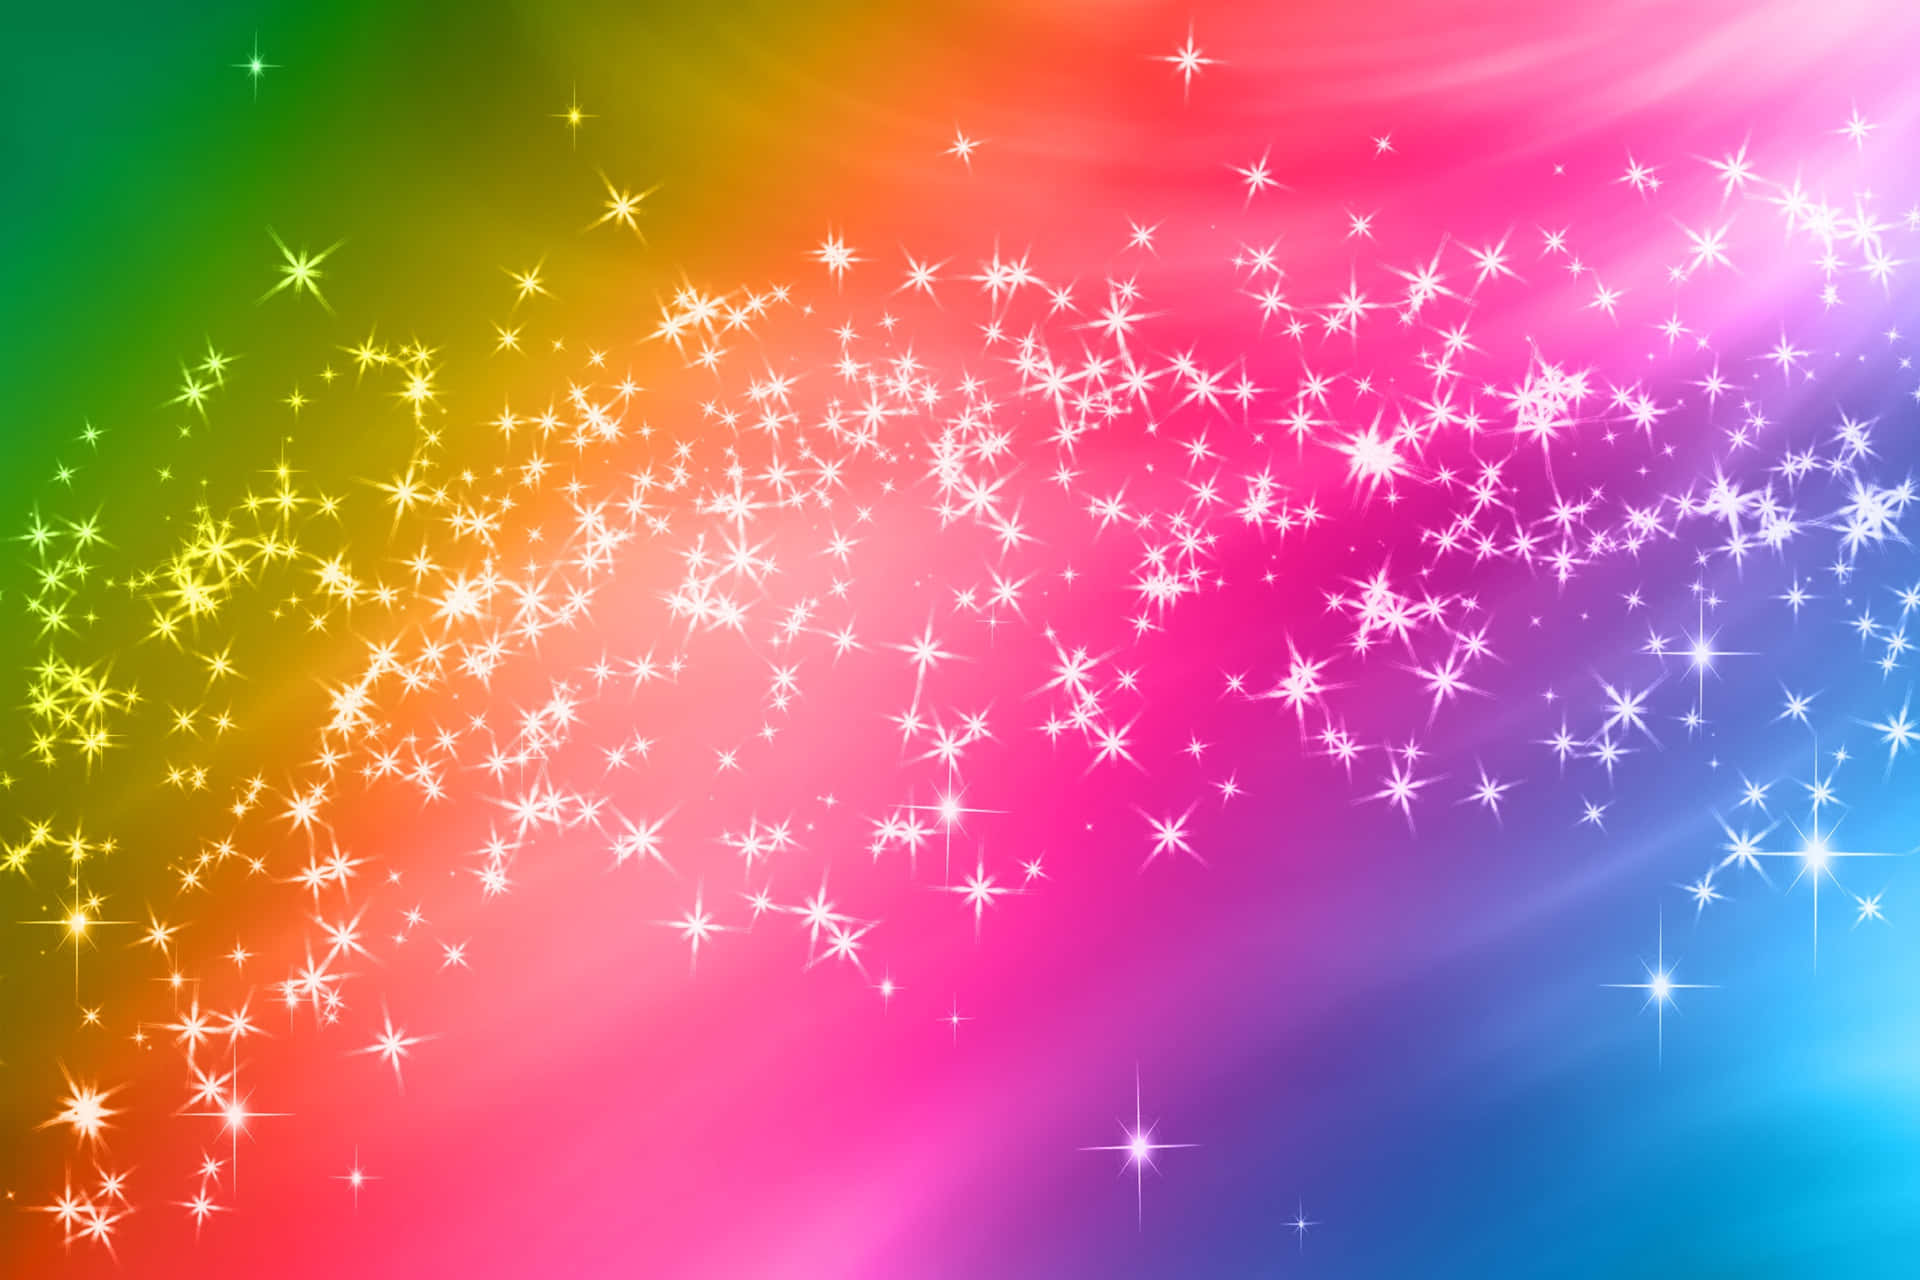 Add a sparkle and shine to your walls with this colorful and glittery background.